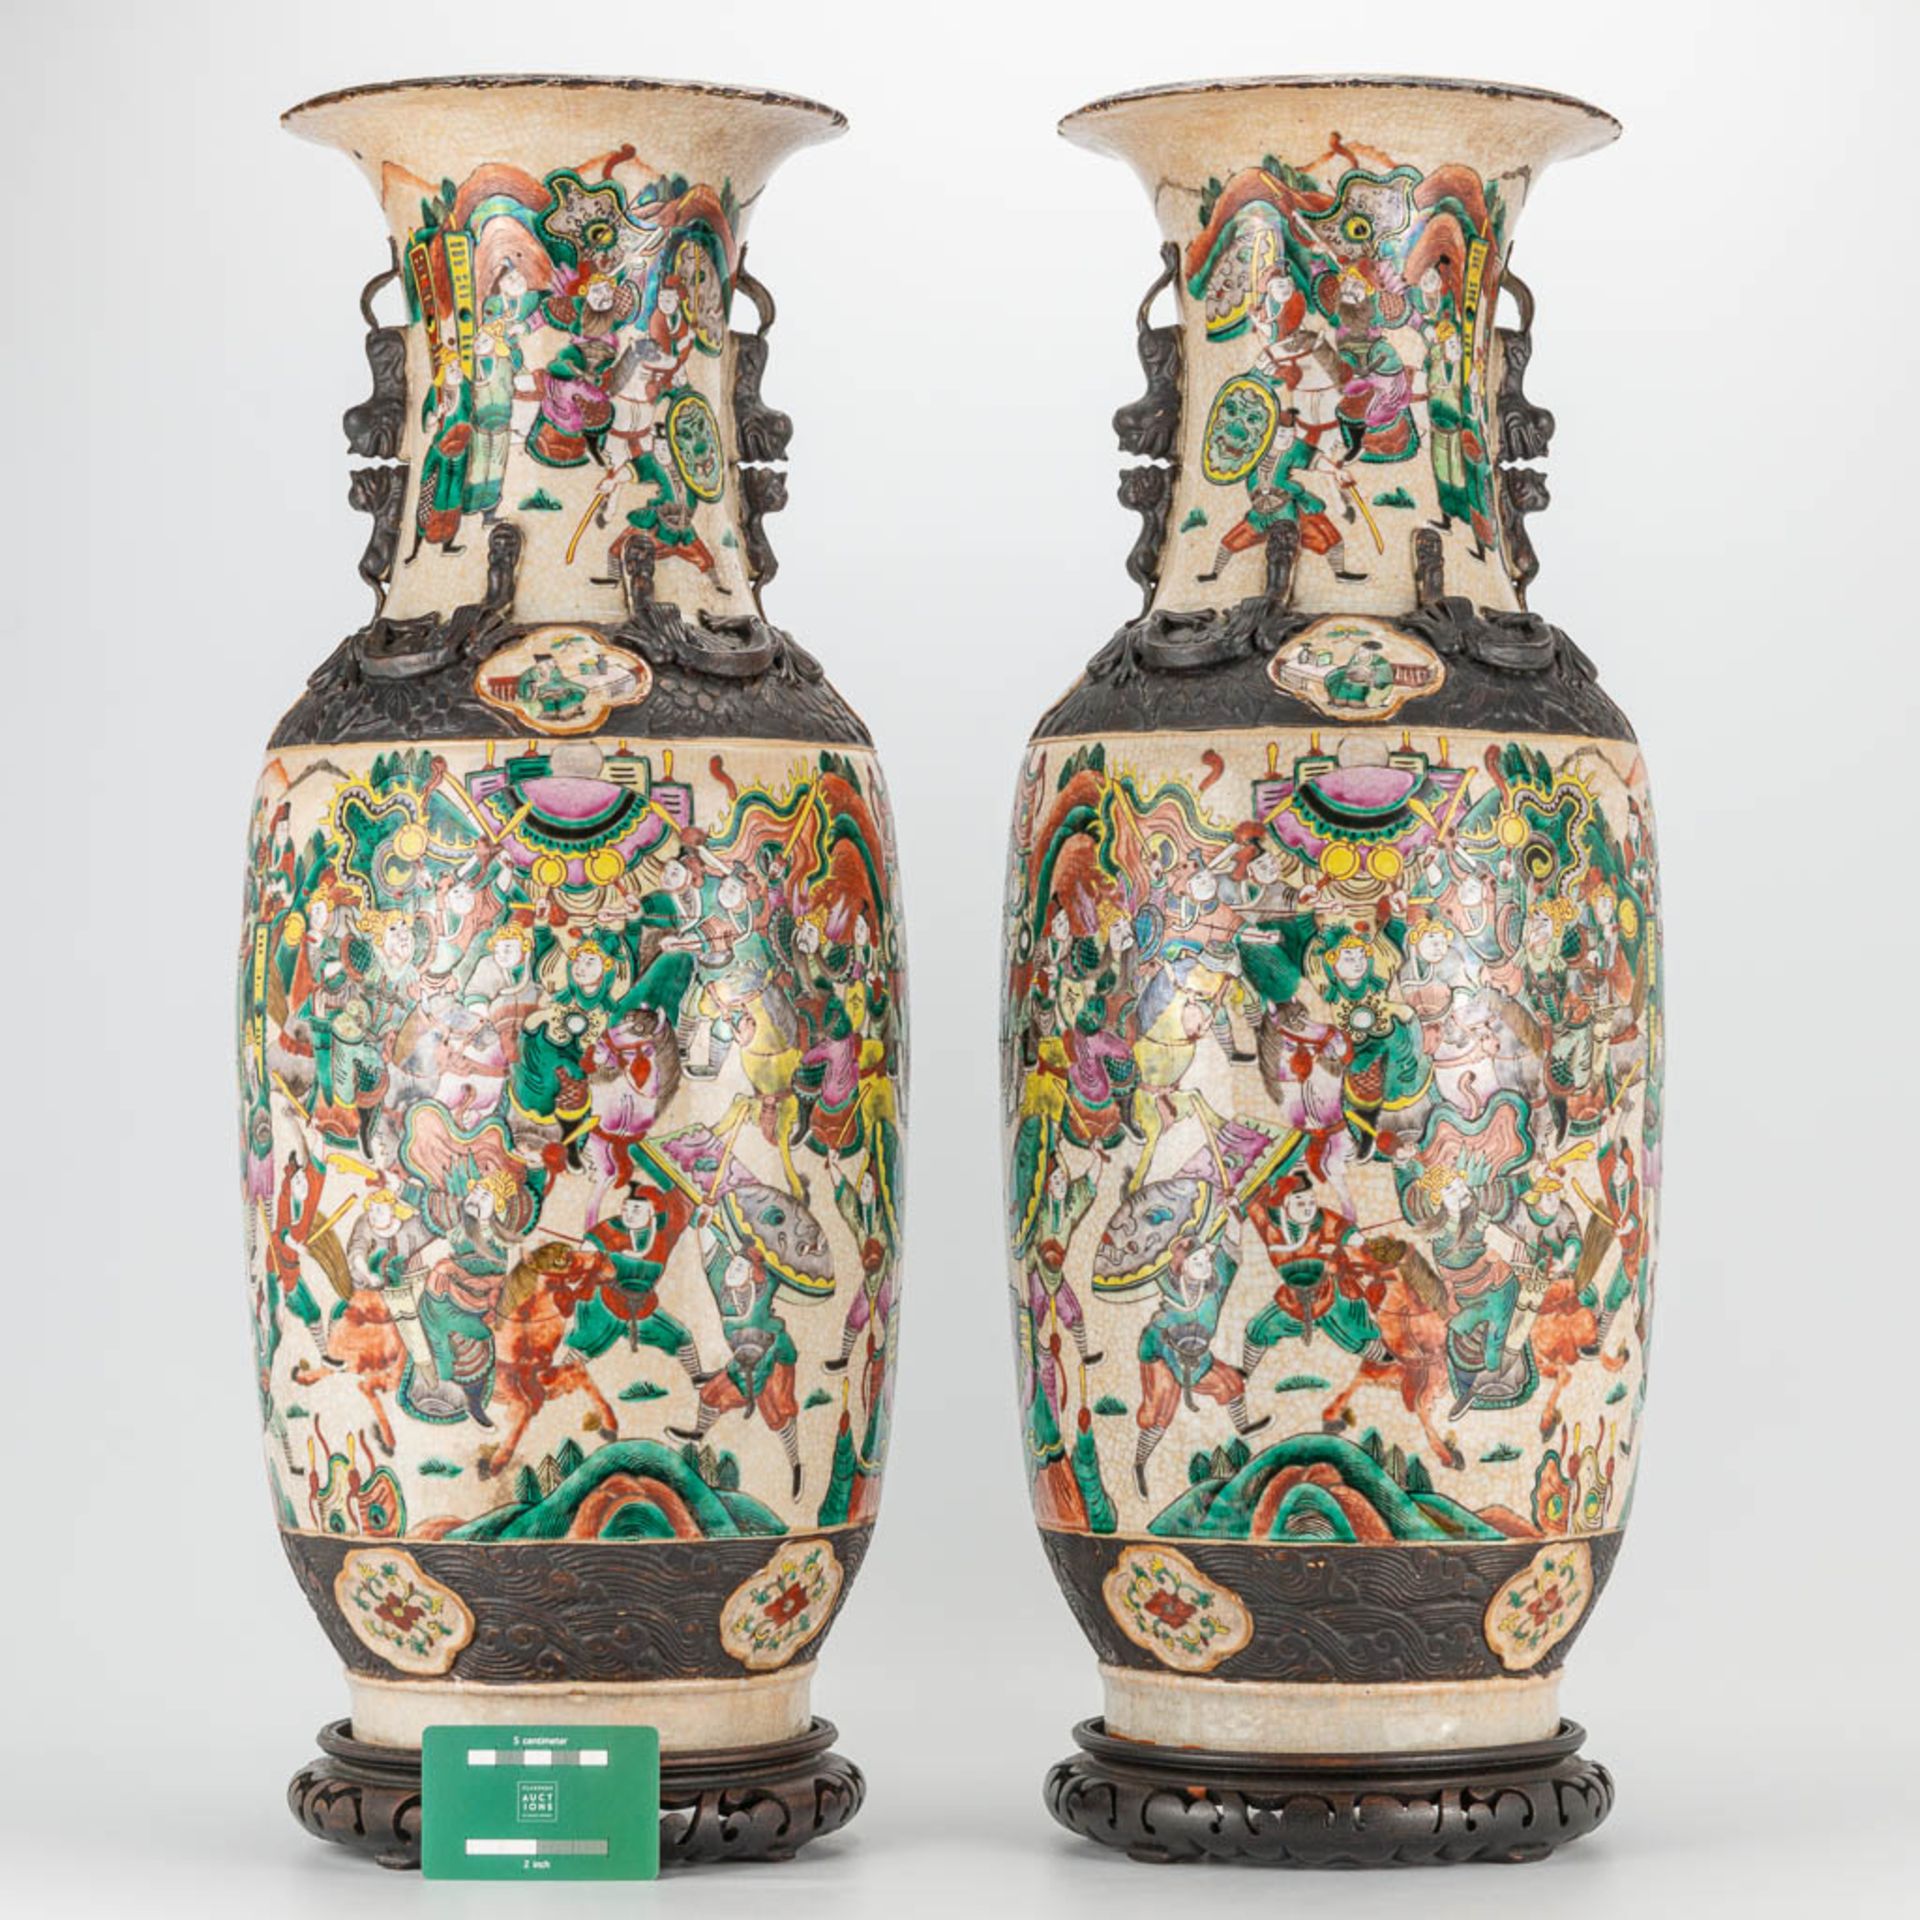 A pair of large Nanking Chinese vases with decor of warriors. 19th/20th century. (62 x 24 cm) - Image 4 of 29